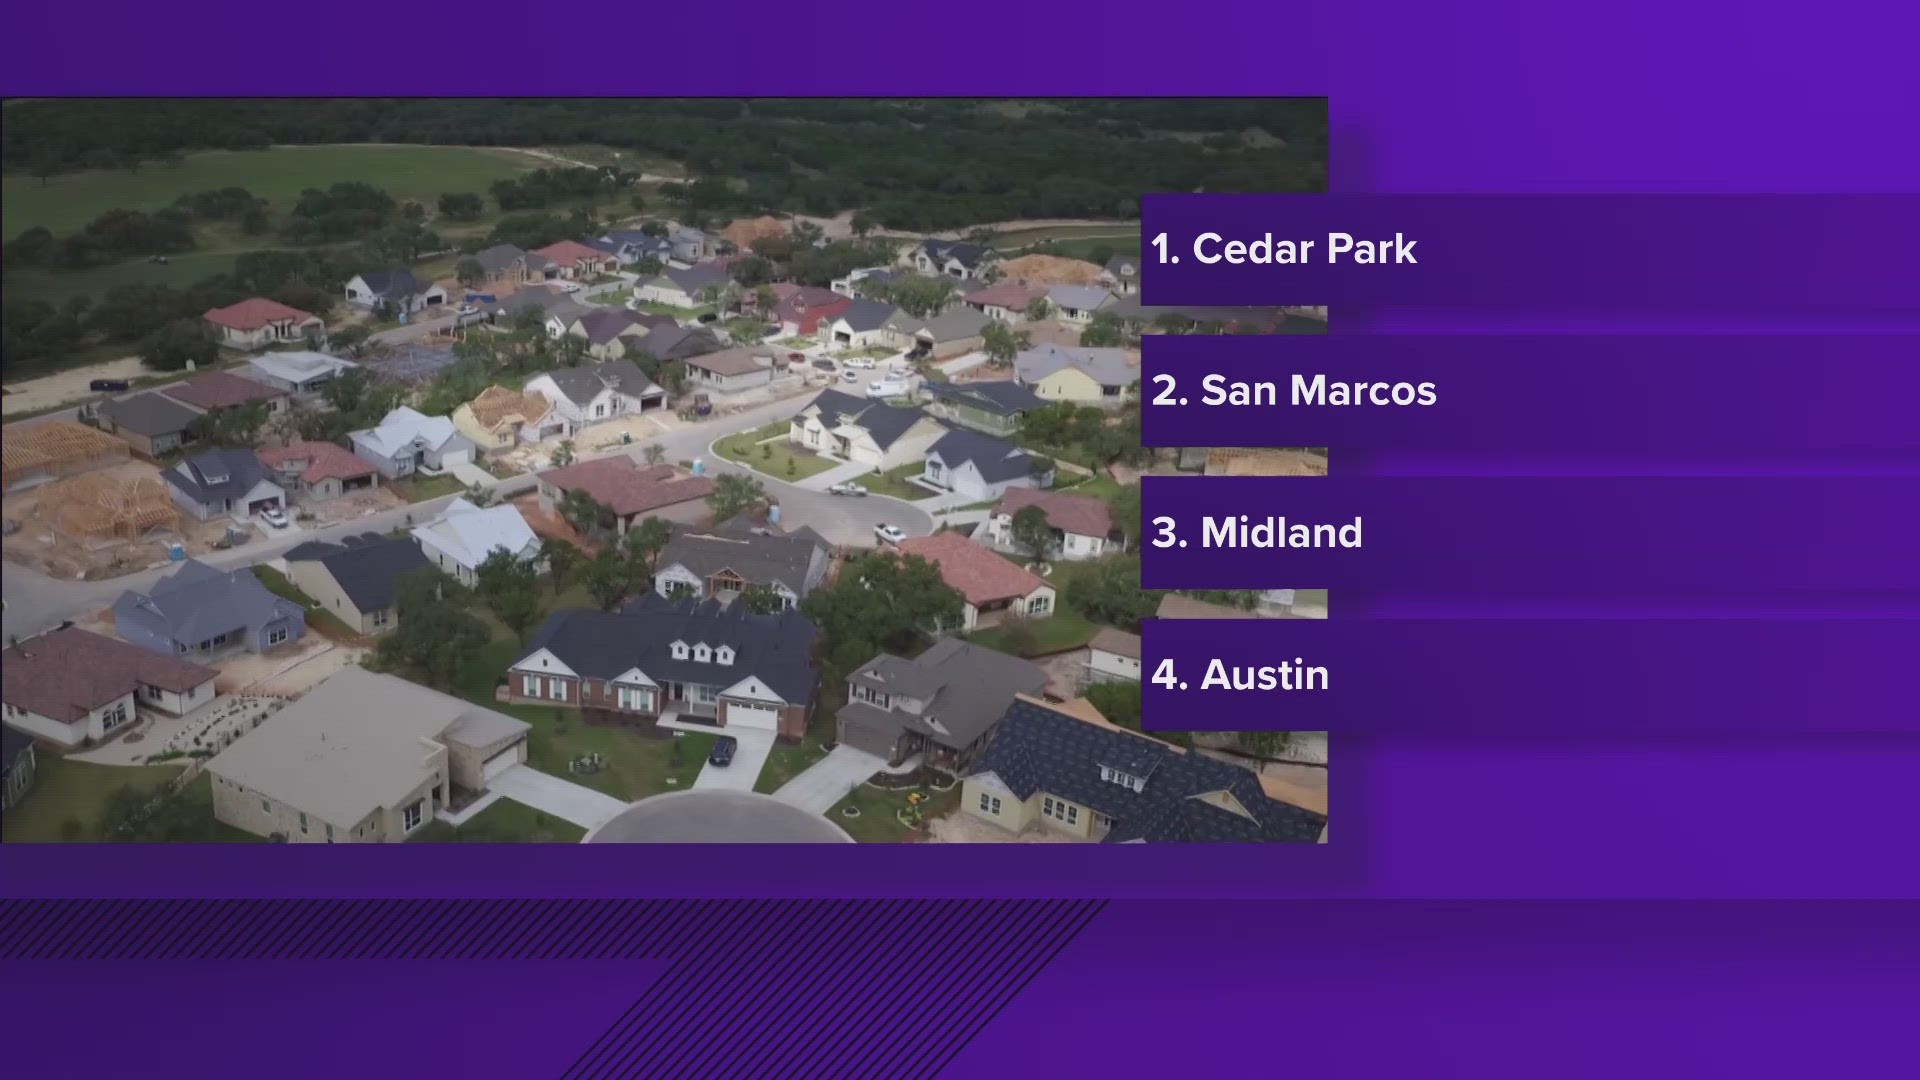 Cedar Park was considered at the top of the list as the most affordable place to live in the southern U.S.